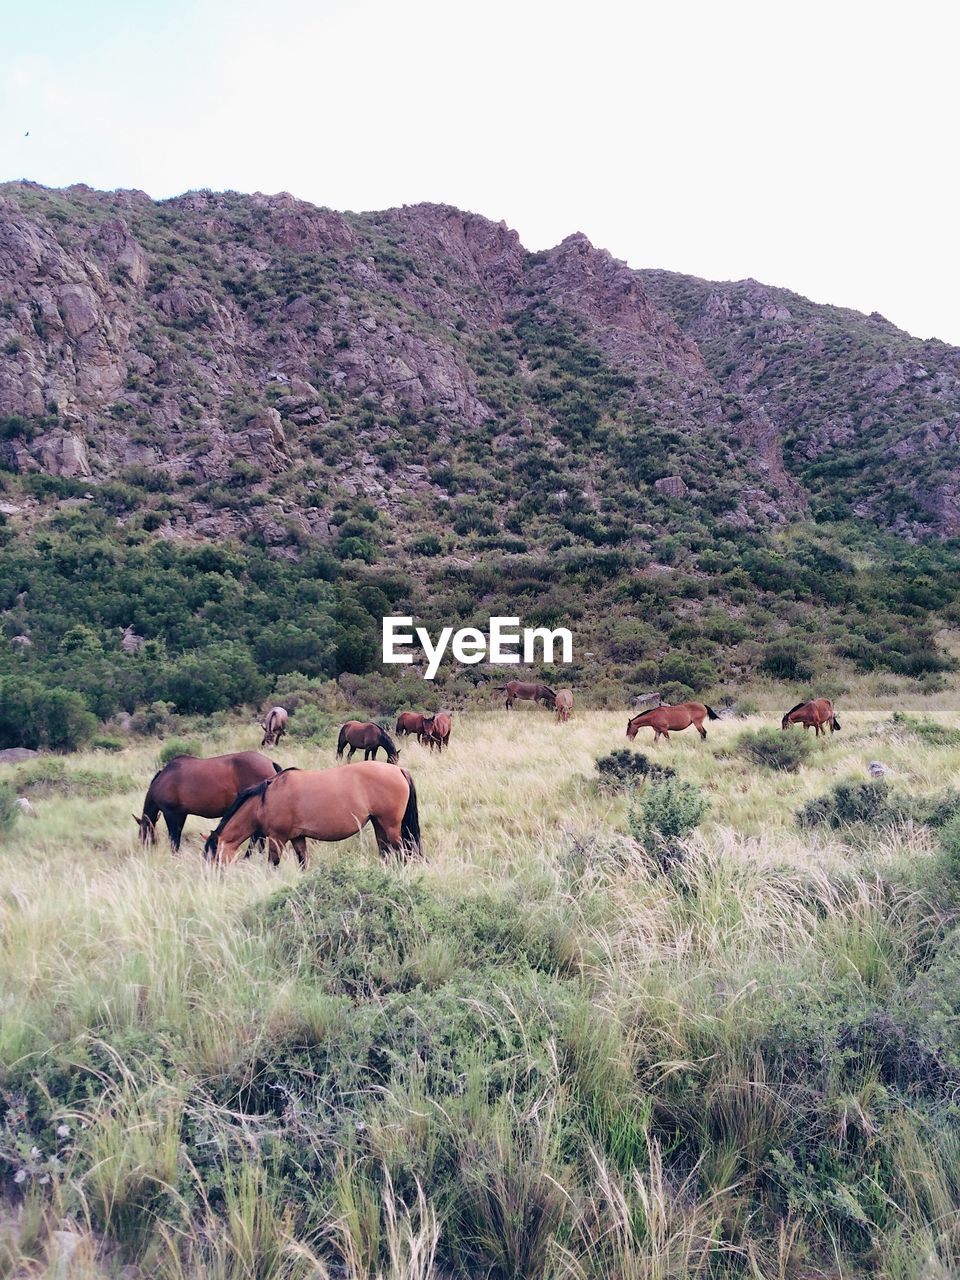 HORSES GRAZING ON FIELD AGAINST MOUNTAINS